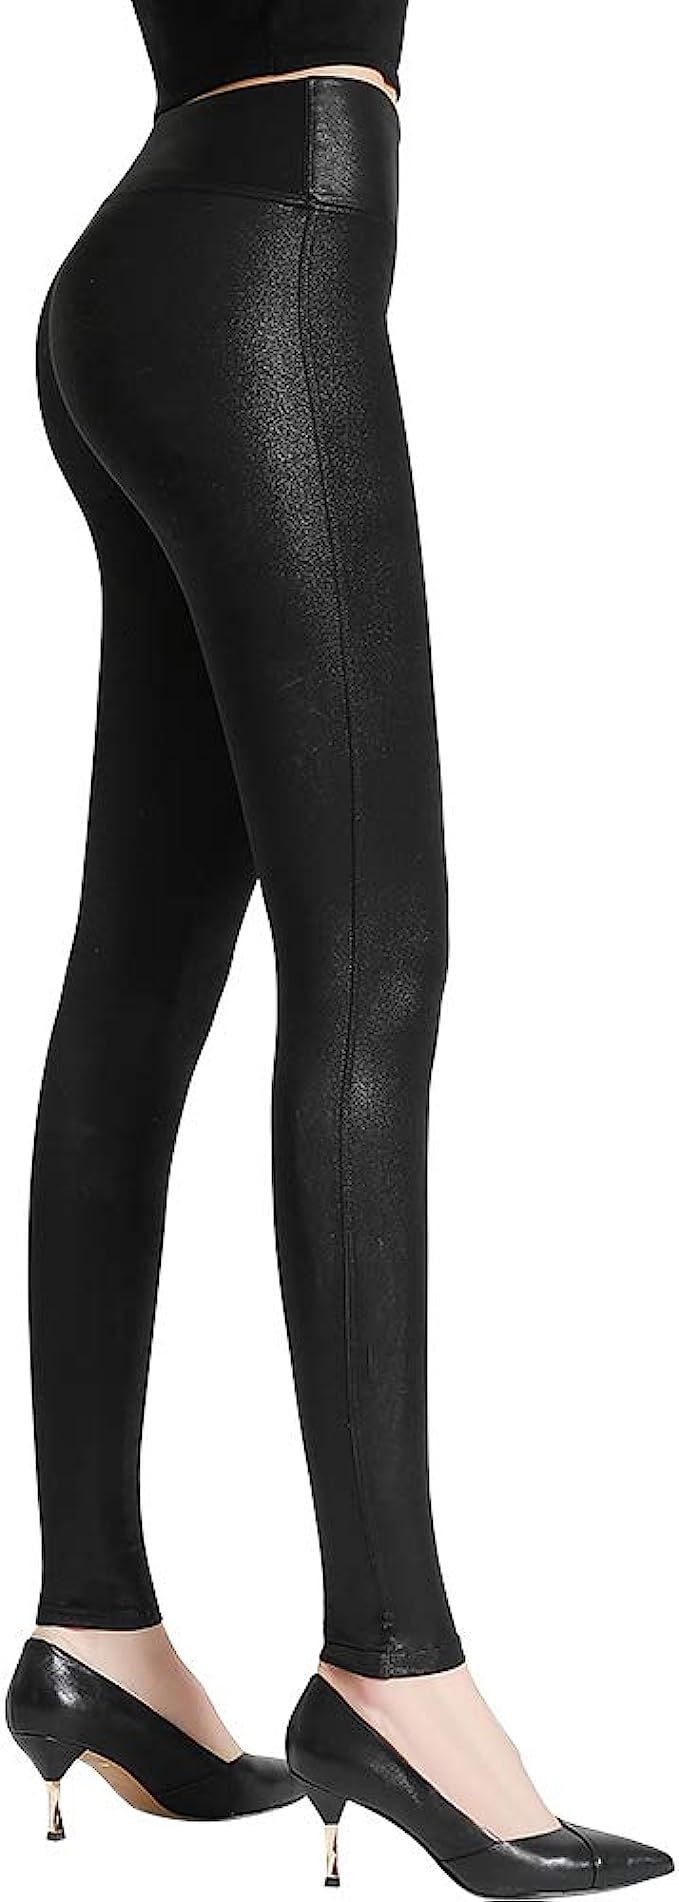 Tagoo Faux Leather Leggings for Women Black High Waist Leather Pants with Gift Box | Amazon (US)